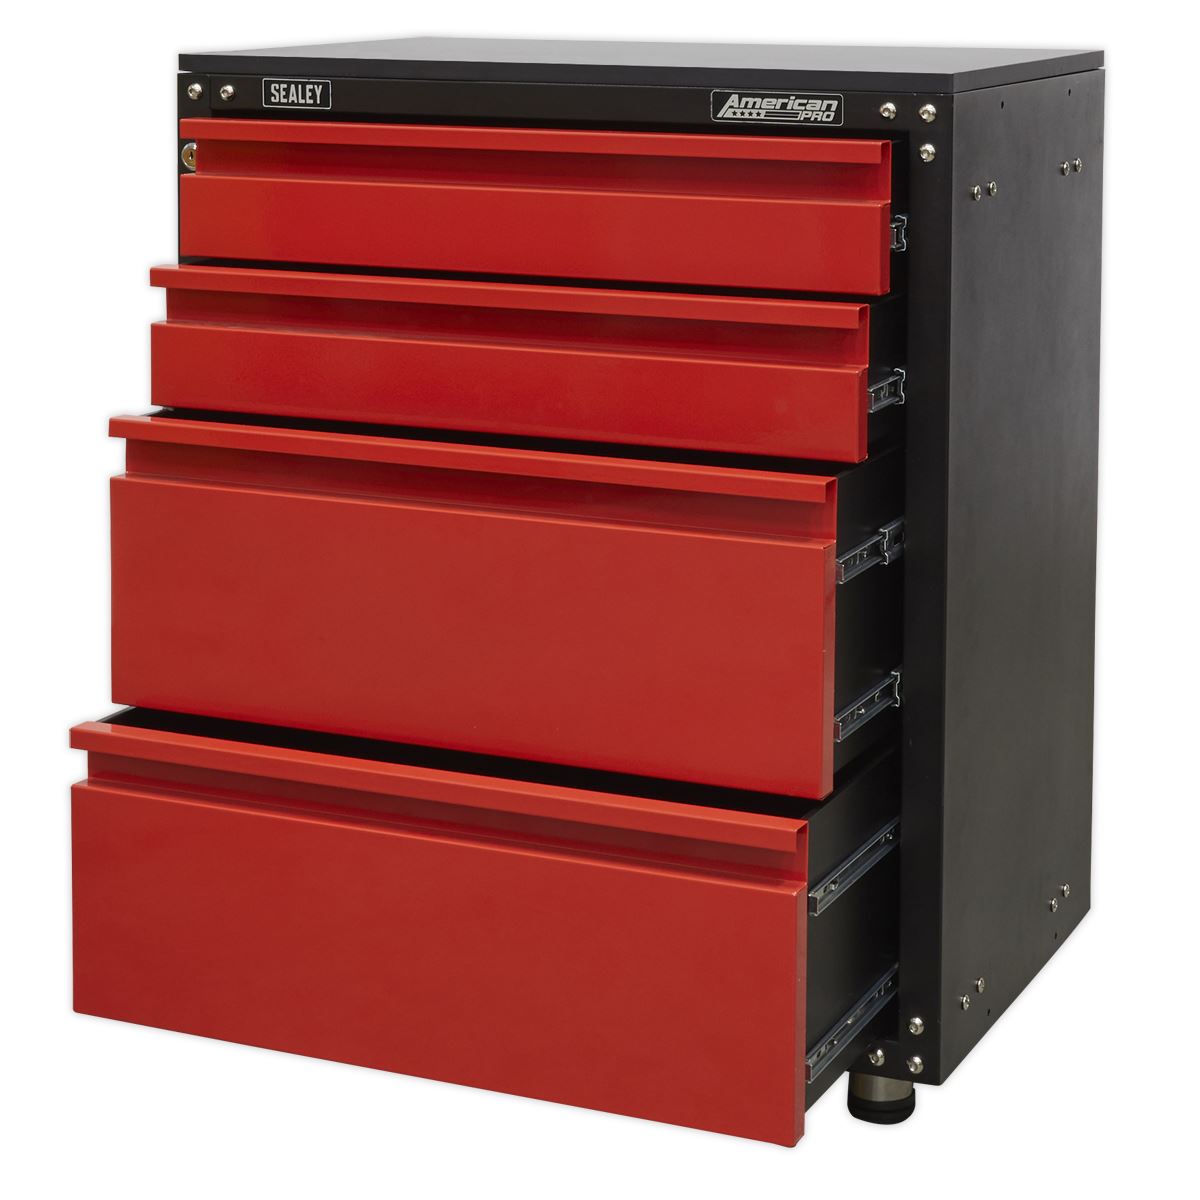 Sealey American Pro Modular 4 Drawer Cabinet with Worktop 665mm